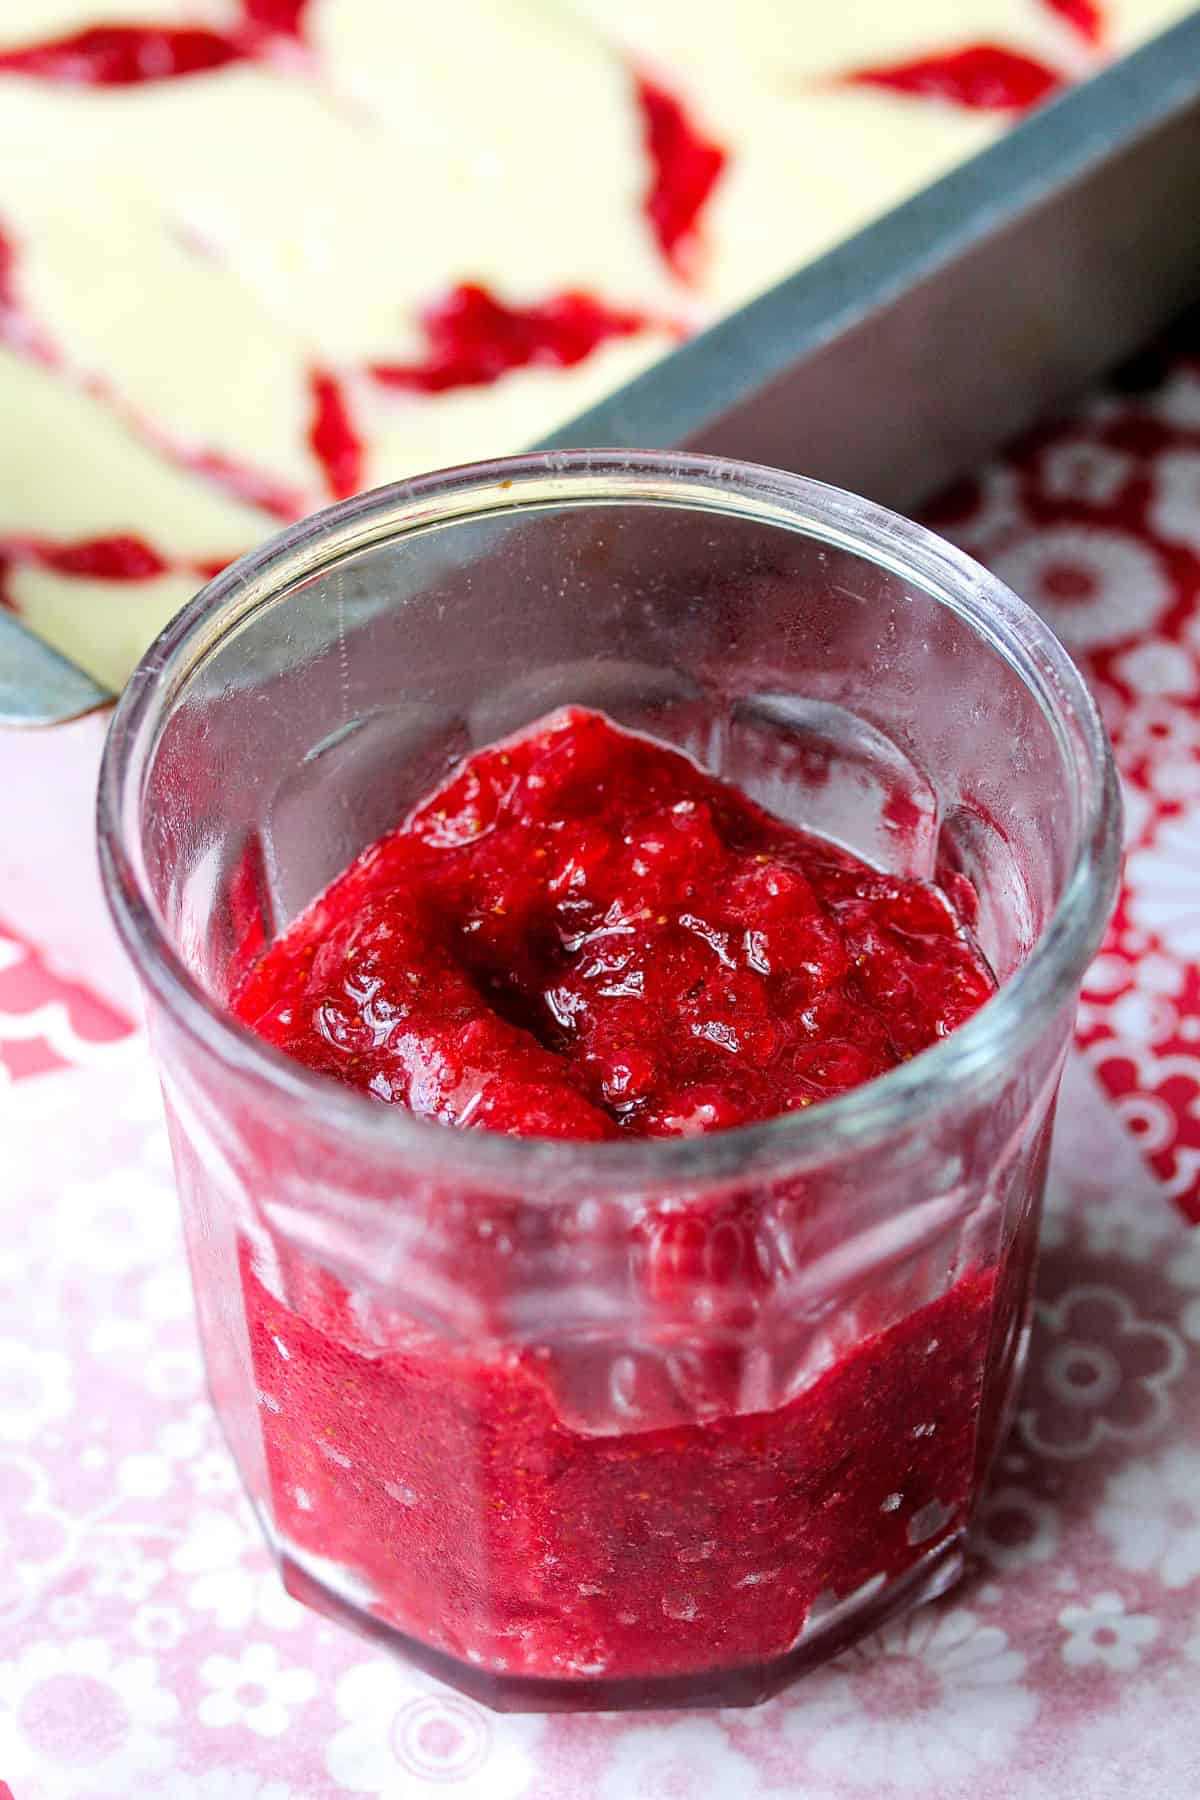 Strawberry jam in a jelly jar with cheesecake in the background.